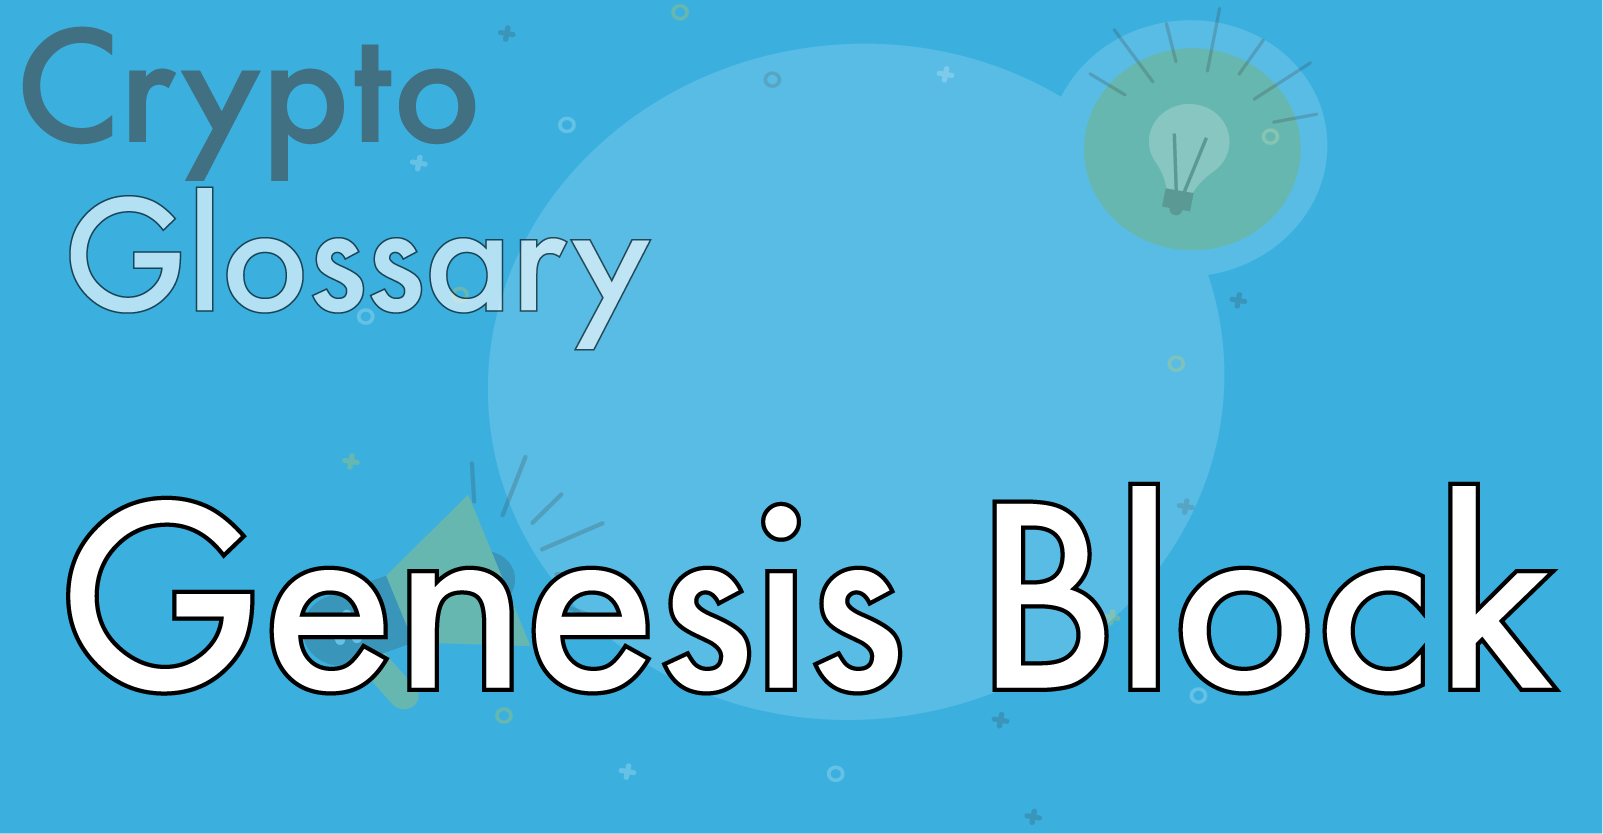 What is the Genesis Block and why should you know about it?